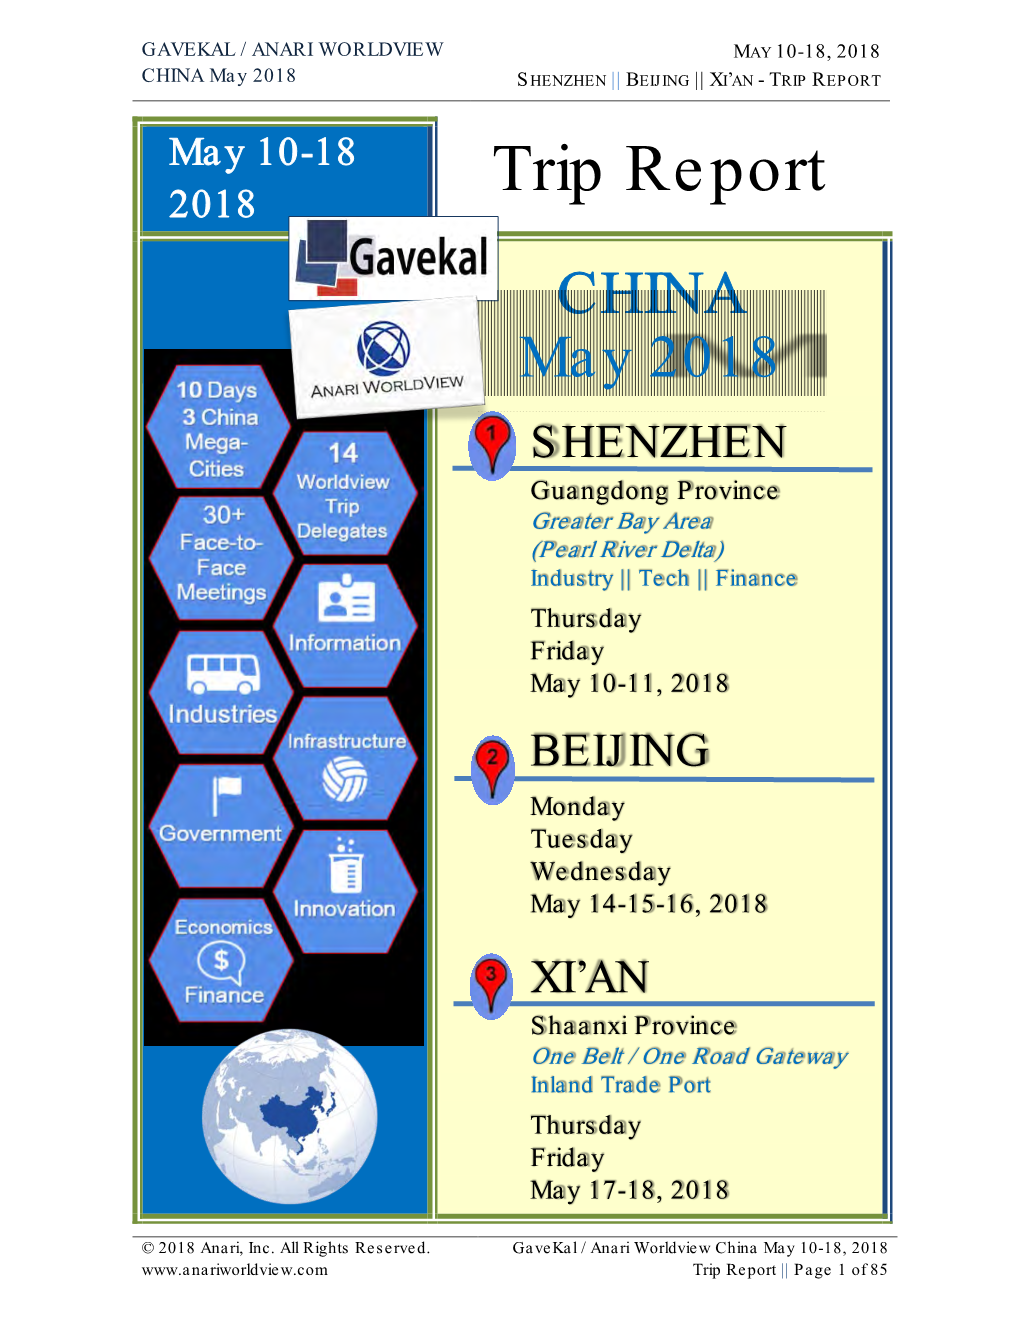 CHINA May 2018 Worldview Trip Report